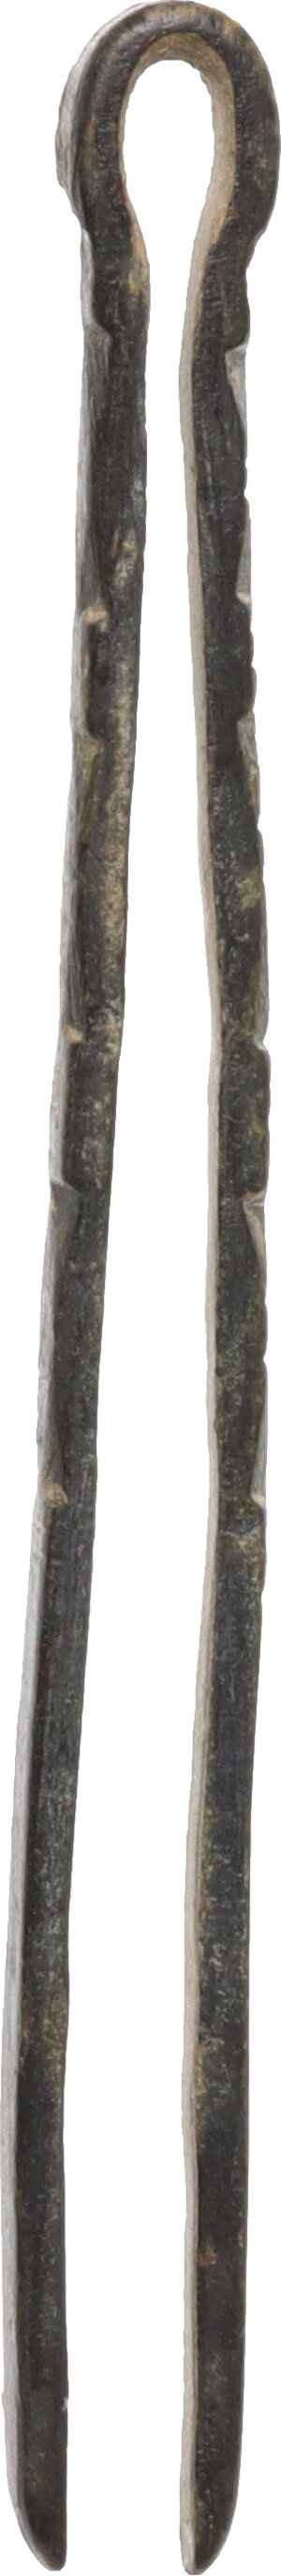 reverse: Bronze tweezers with geometric decorations along the length of the arms.  Roman, 1st-3rd century AD  Length 63 mm. 4.03 g